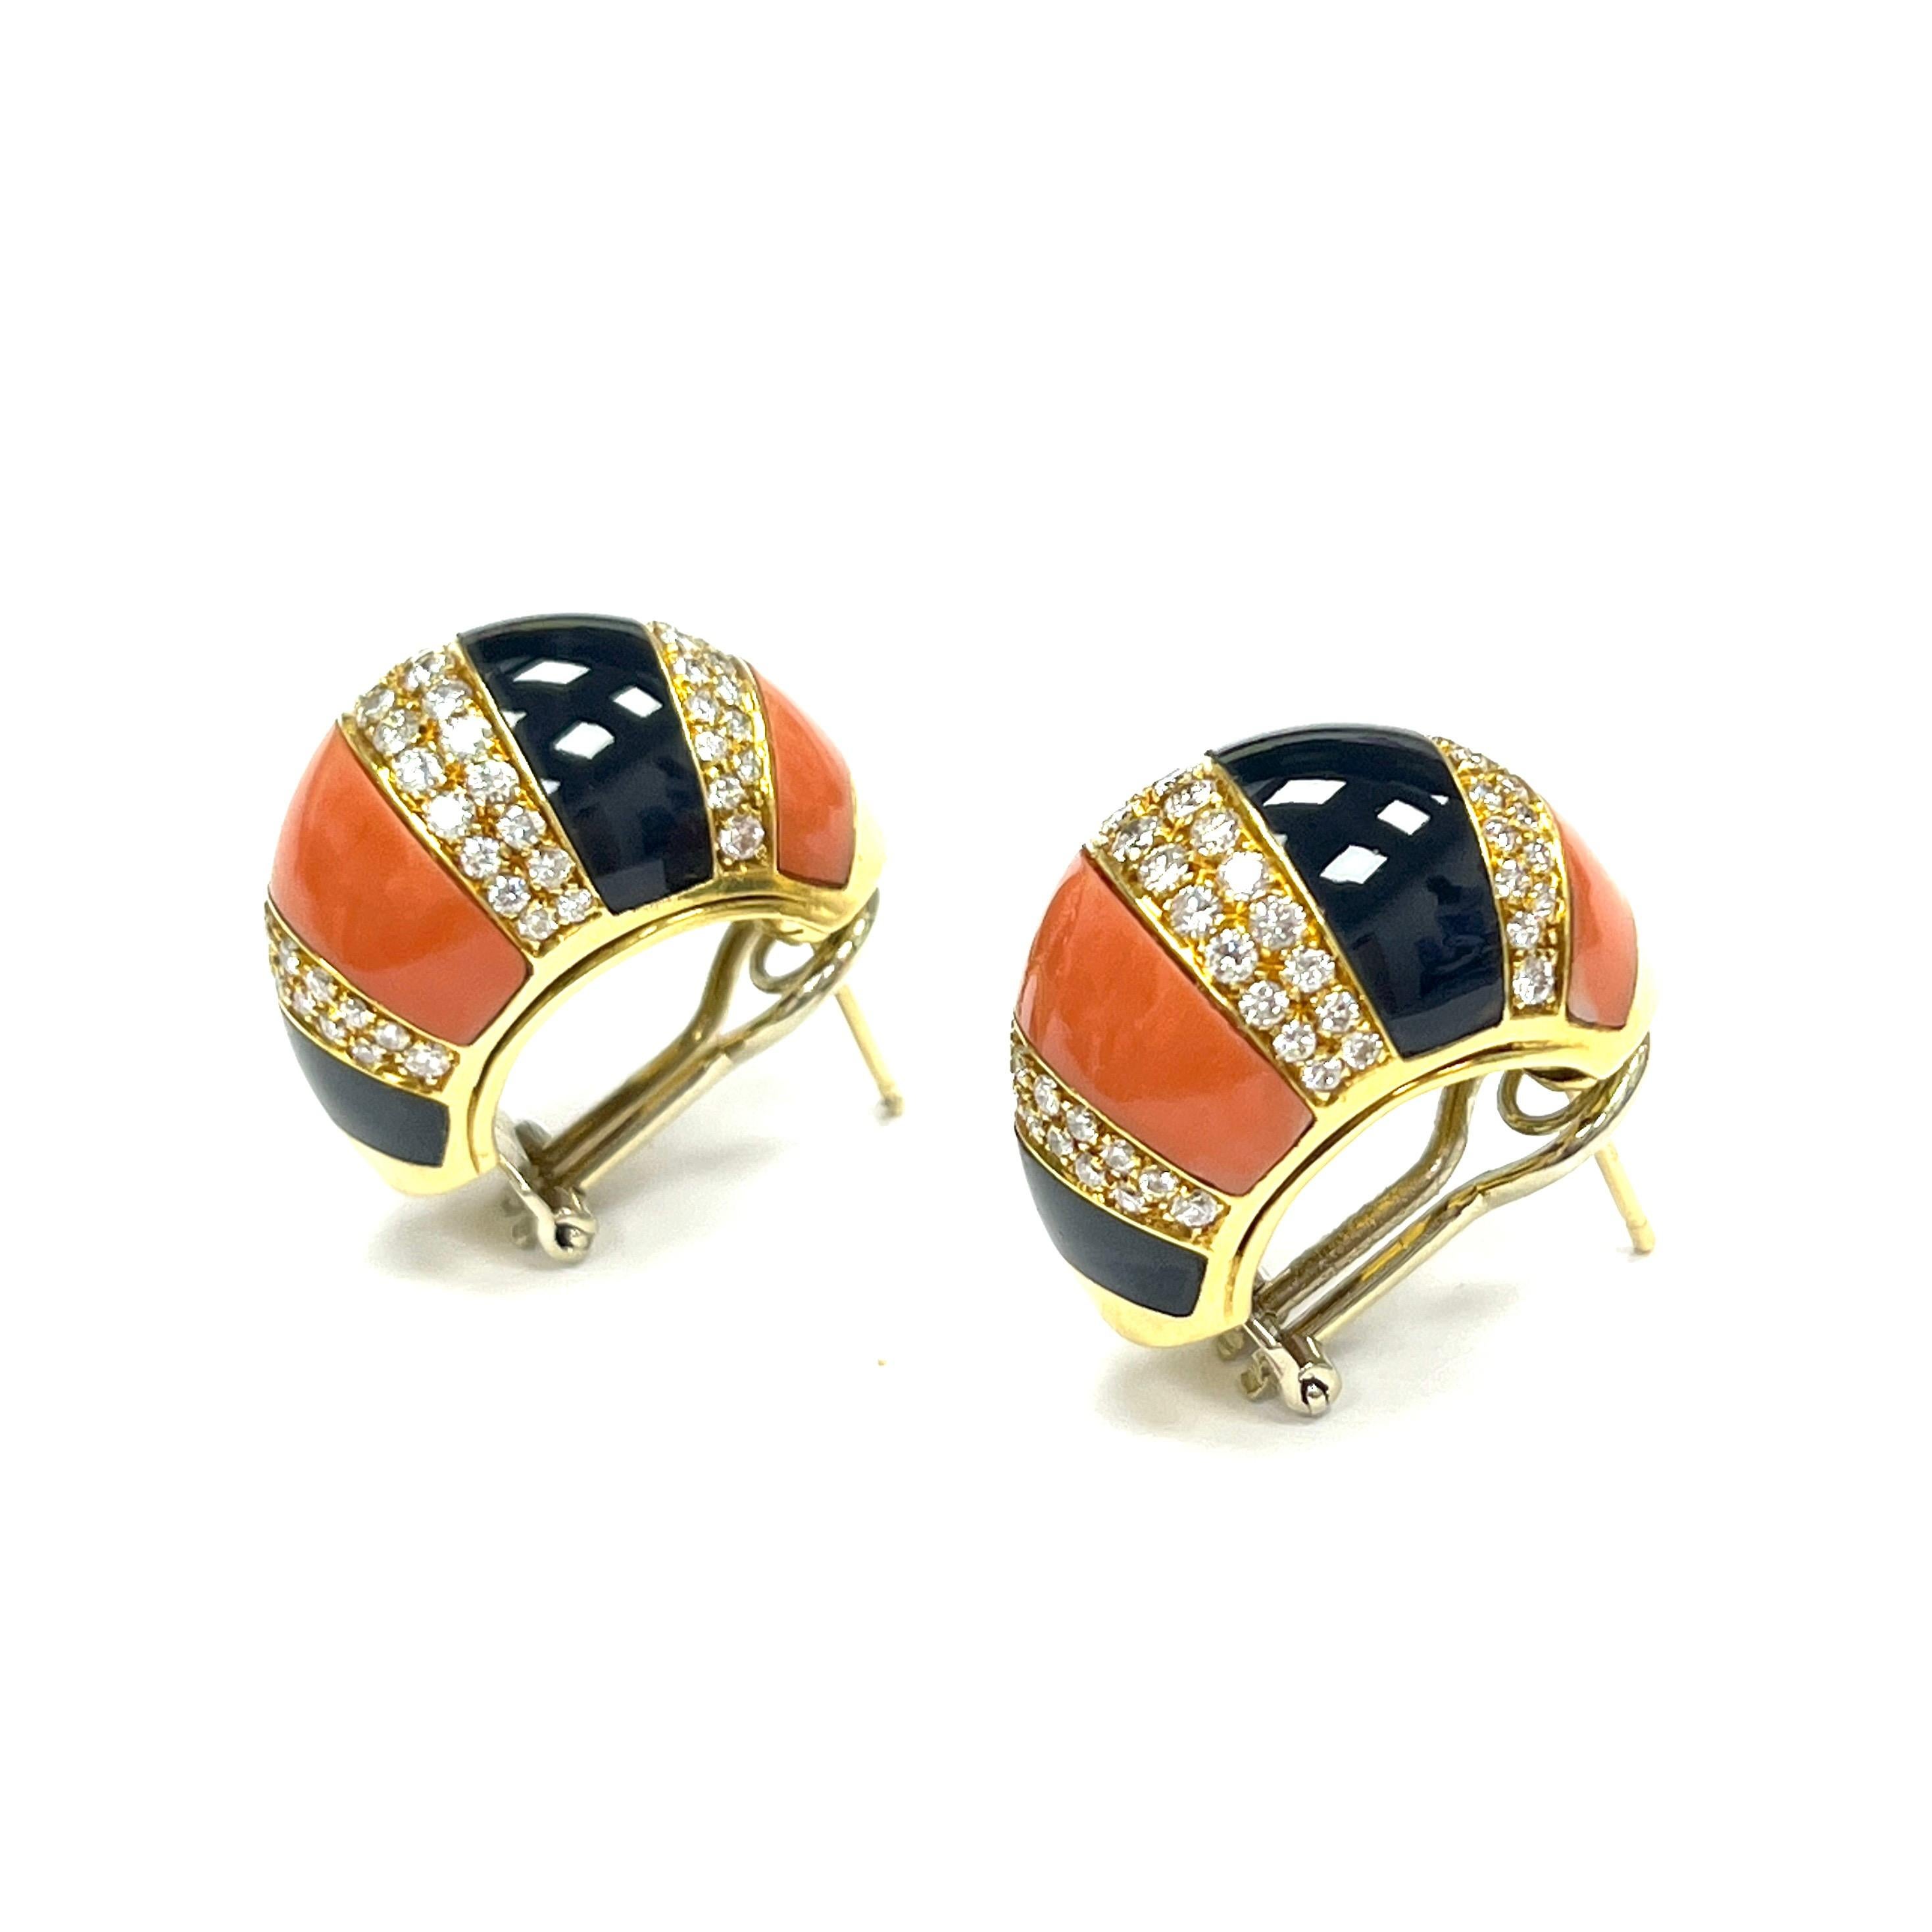 Fred Paris coral black onyx diamond gold earrings

Beautiful pair of coral and black onyx clip-on earrings with posts, featuring round-cut diamonds, 18 karat yellow gold; marked Fred, 750, Paris

Total weight: 25.5 grams